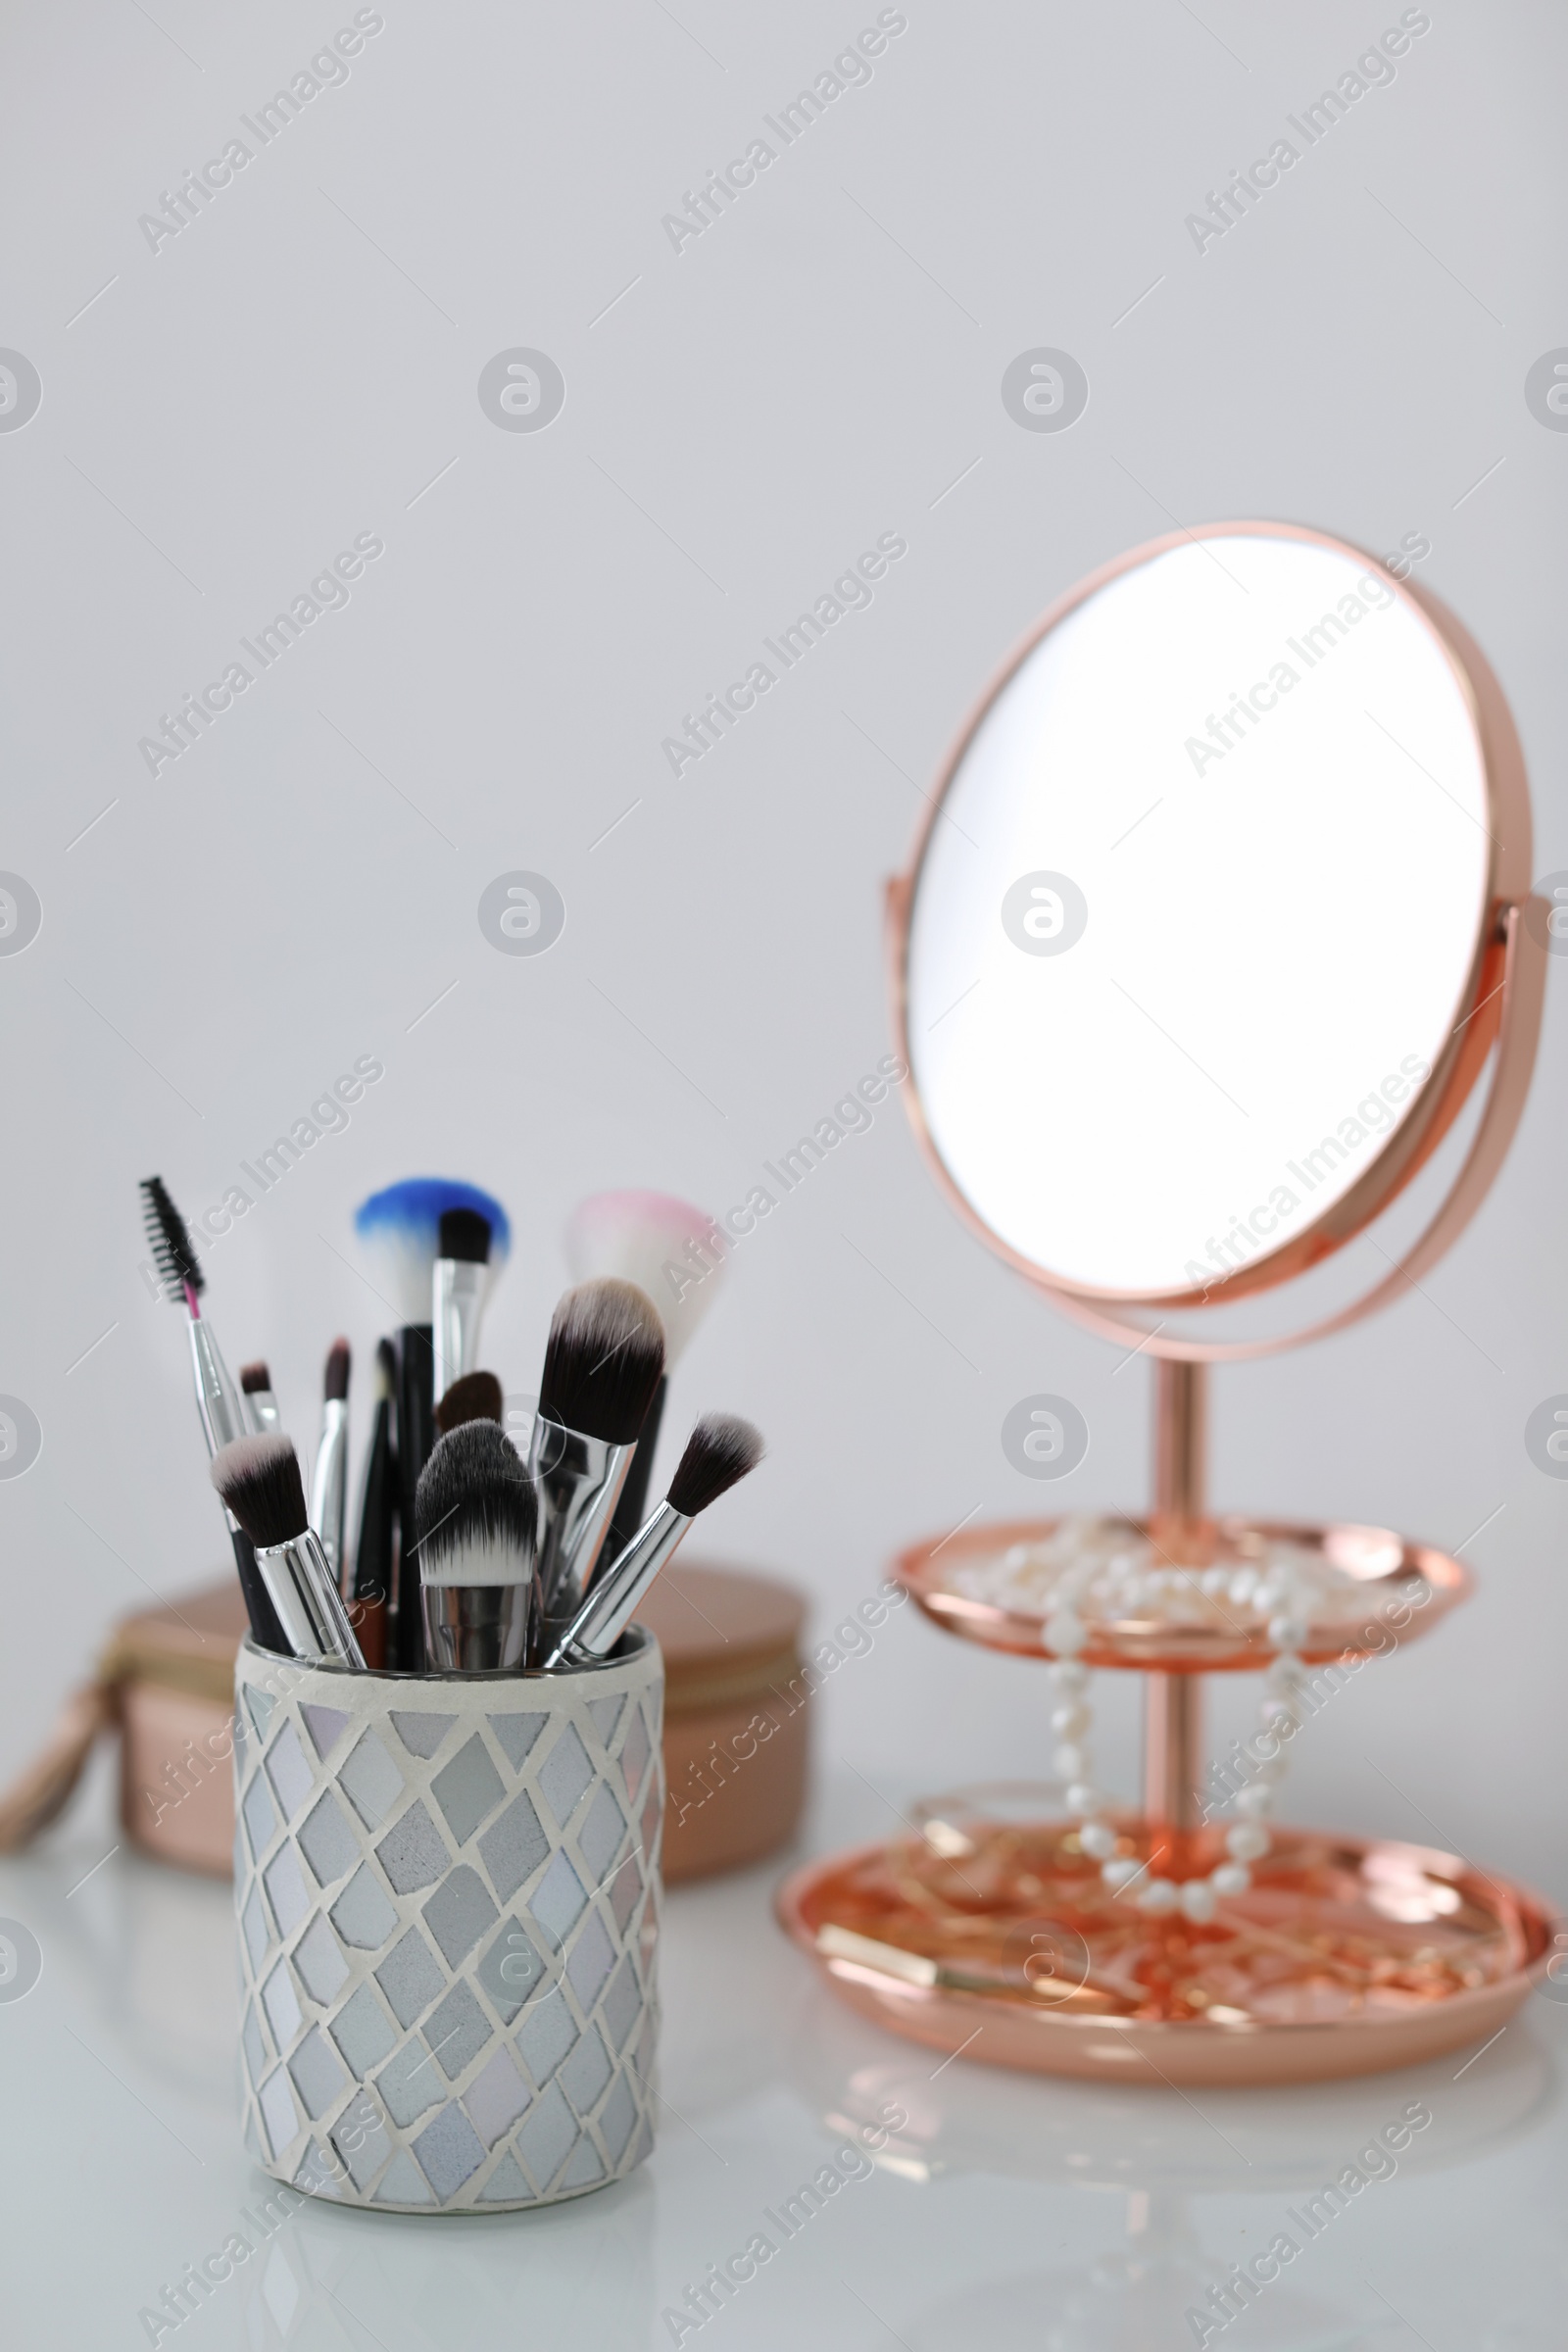 Photo of Makeup brushes in holder on table against light background